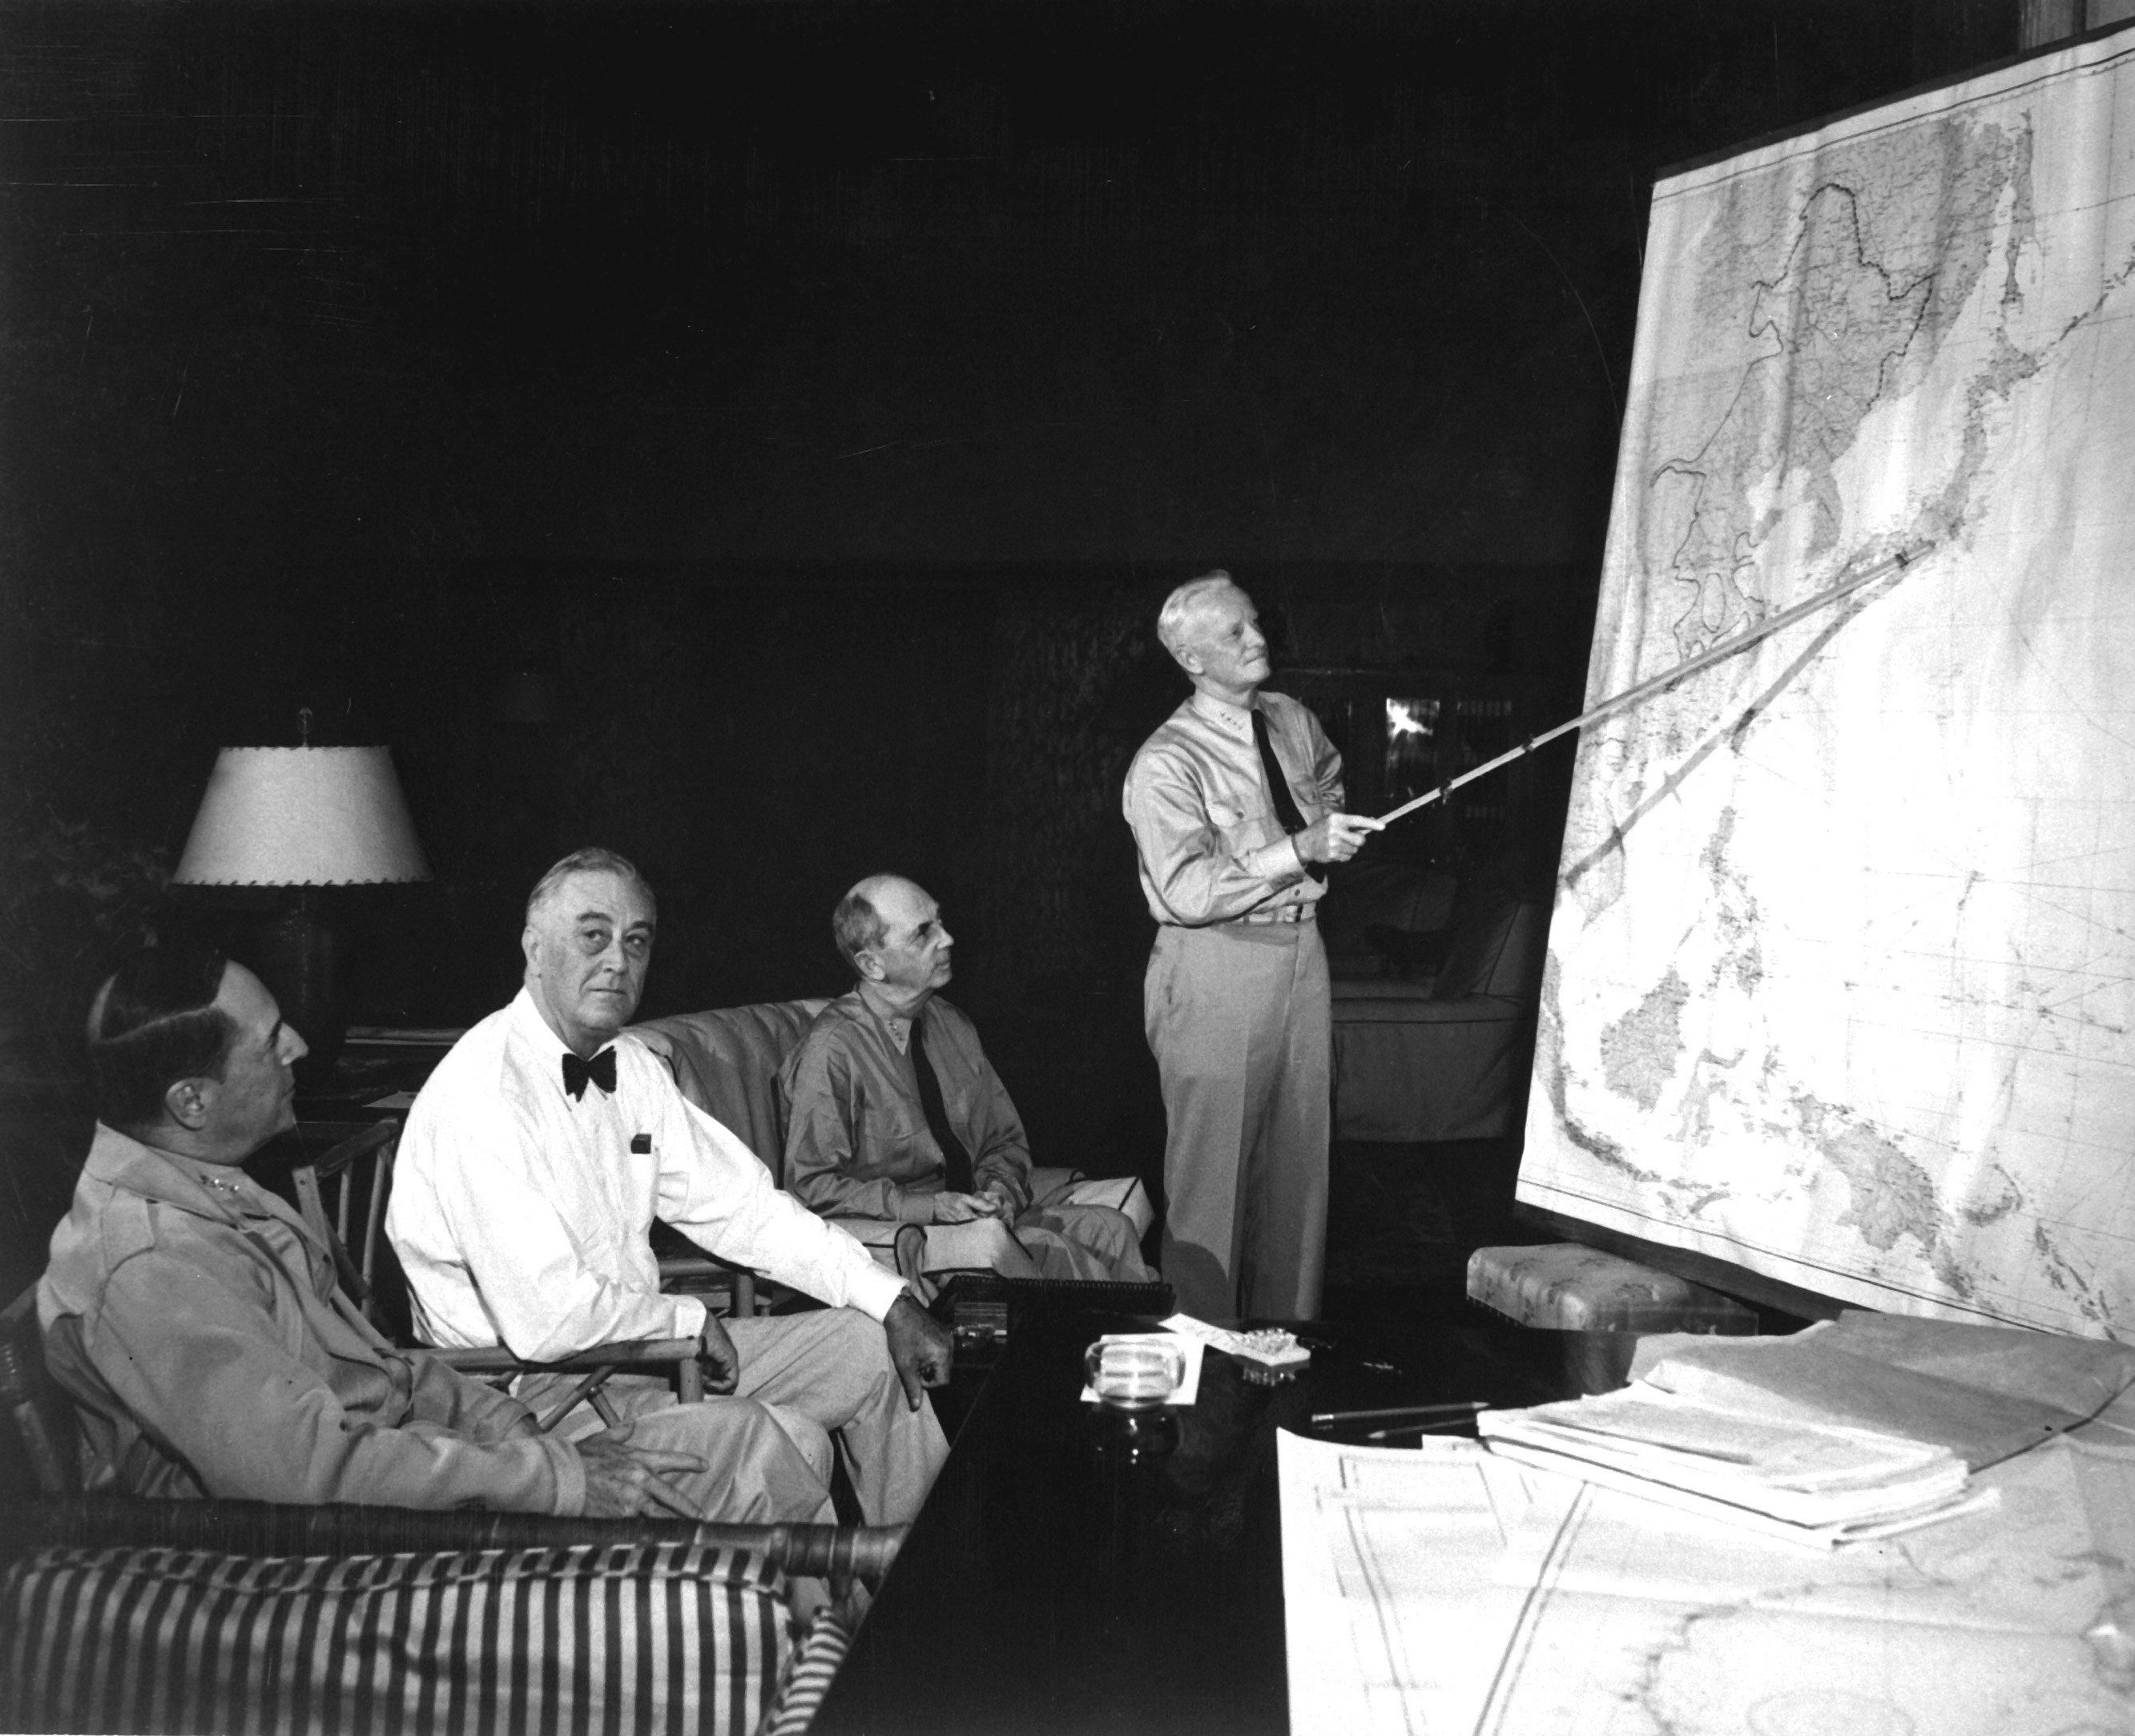 US President Roosevelt in conference with MacArthur, Leahy, and Nimitz, at the Queen’s Surf Residence, Honolulu, Oahu, US Territory of Hawaii, 28 Jul 1944, photo 1 of 3